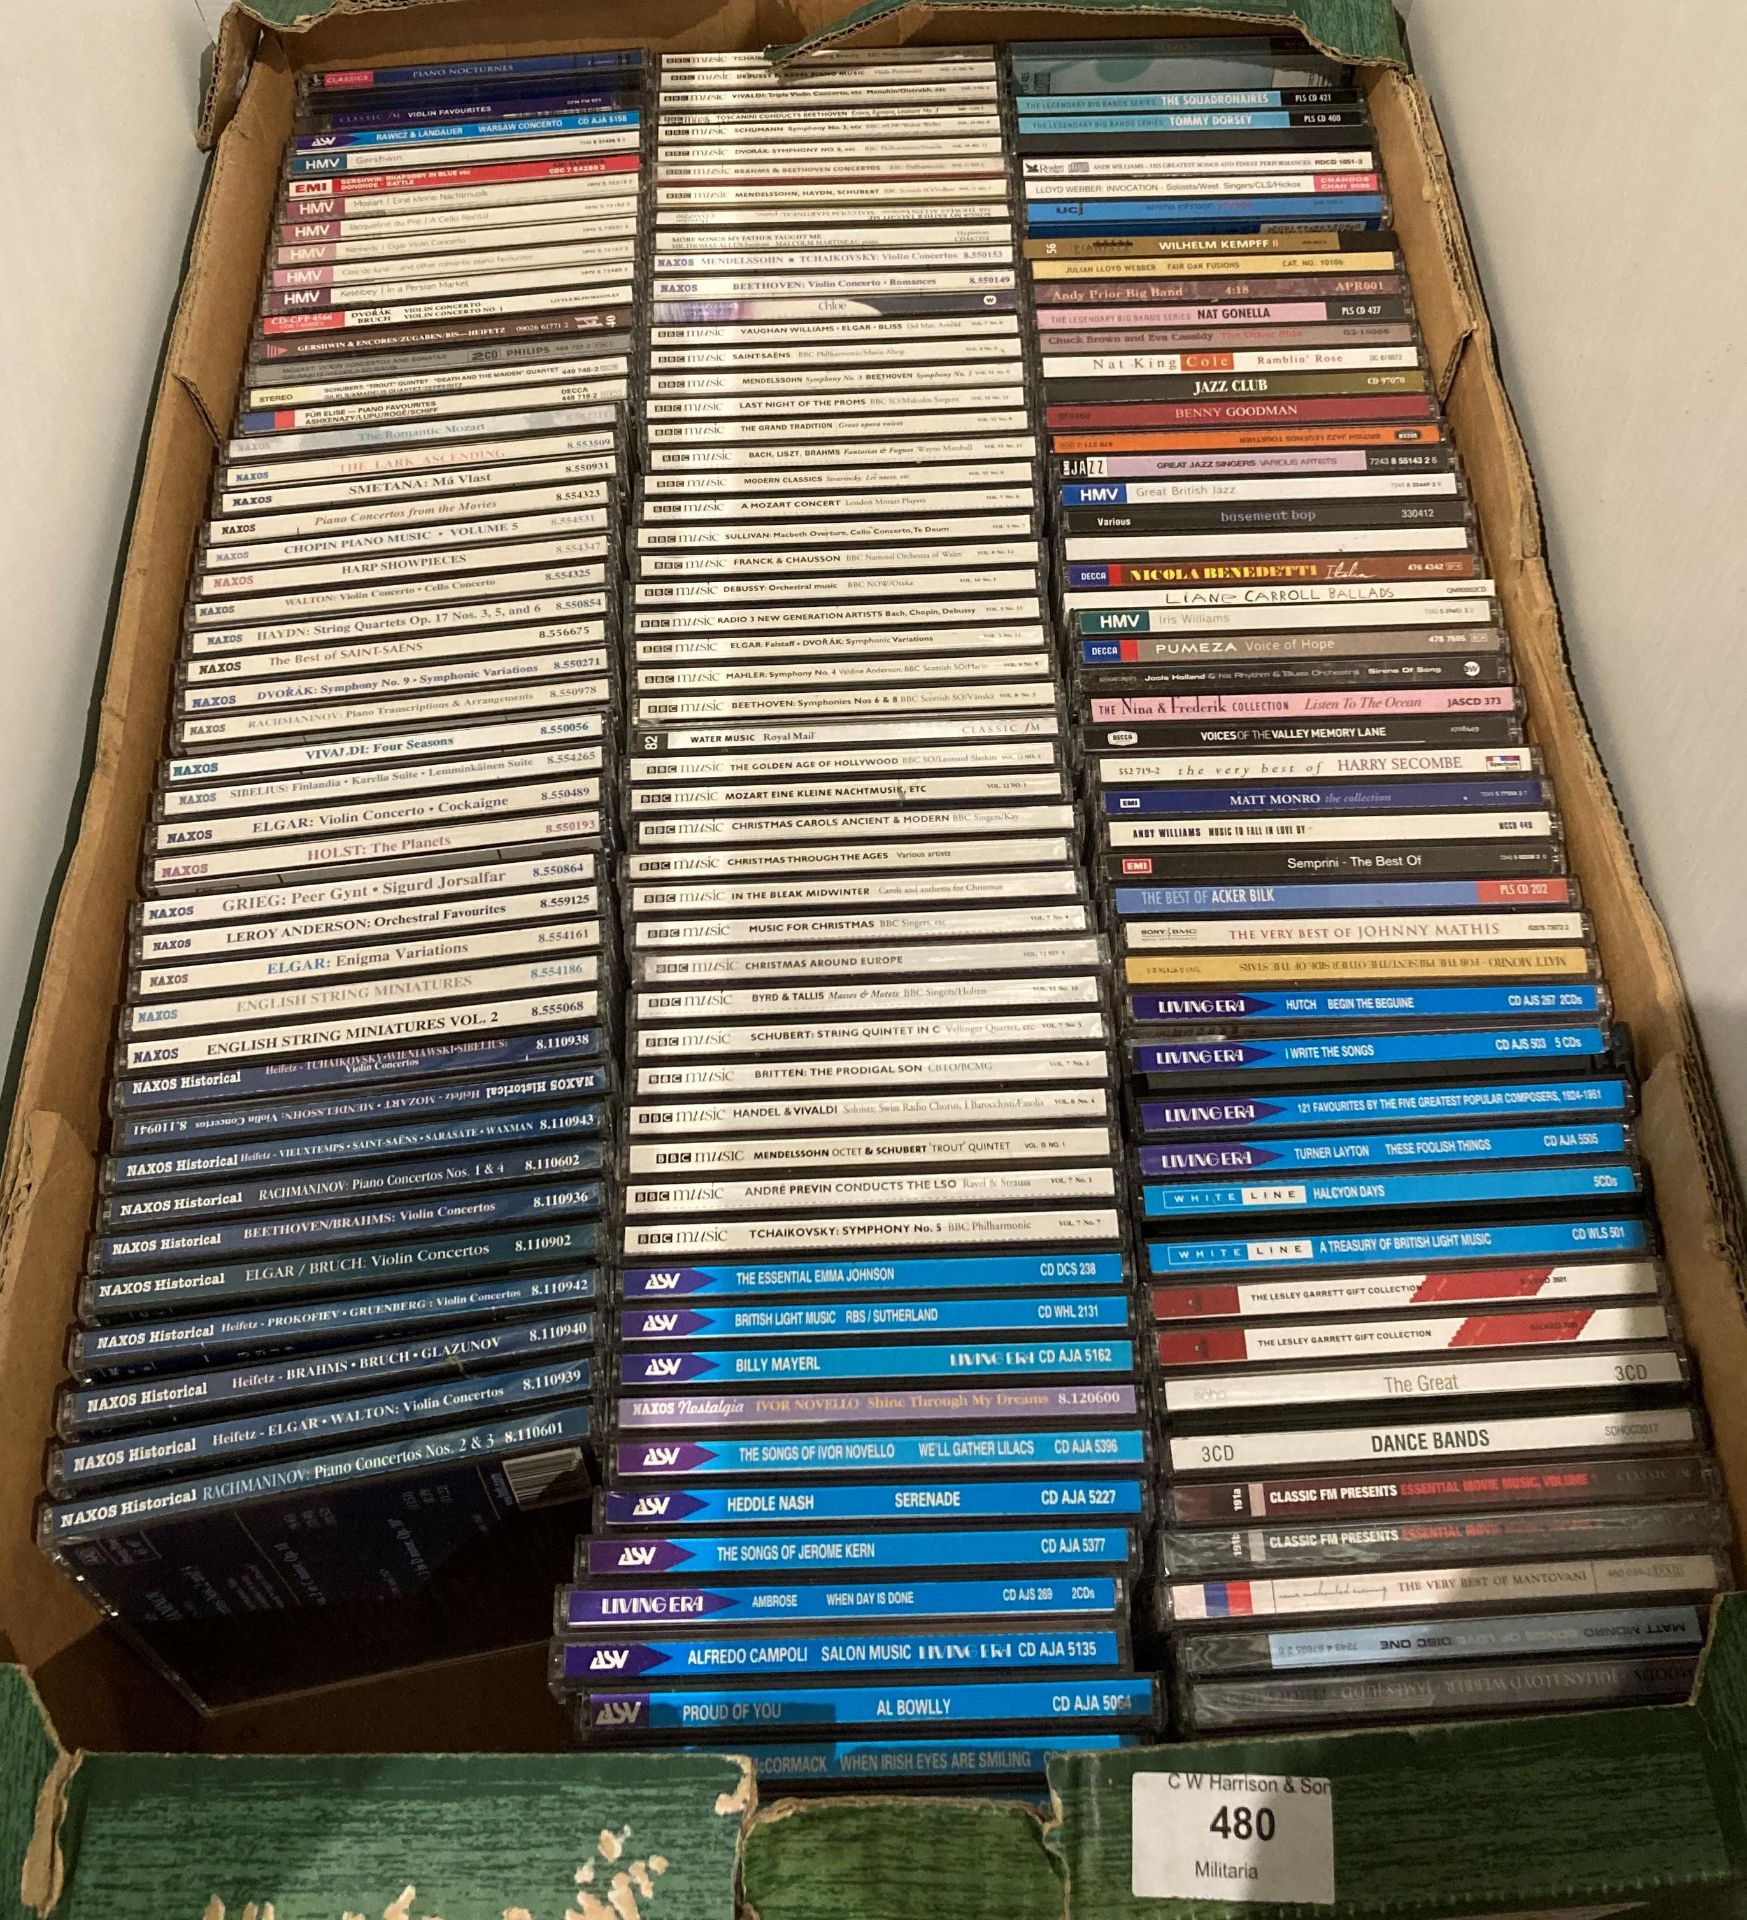 Contents to crate - approximately 150 assorted music CDs including classical by BBC Music etc.